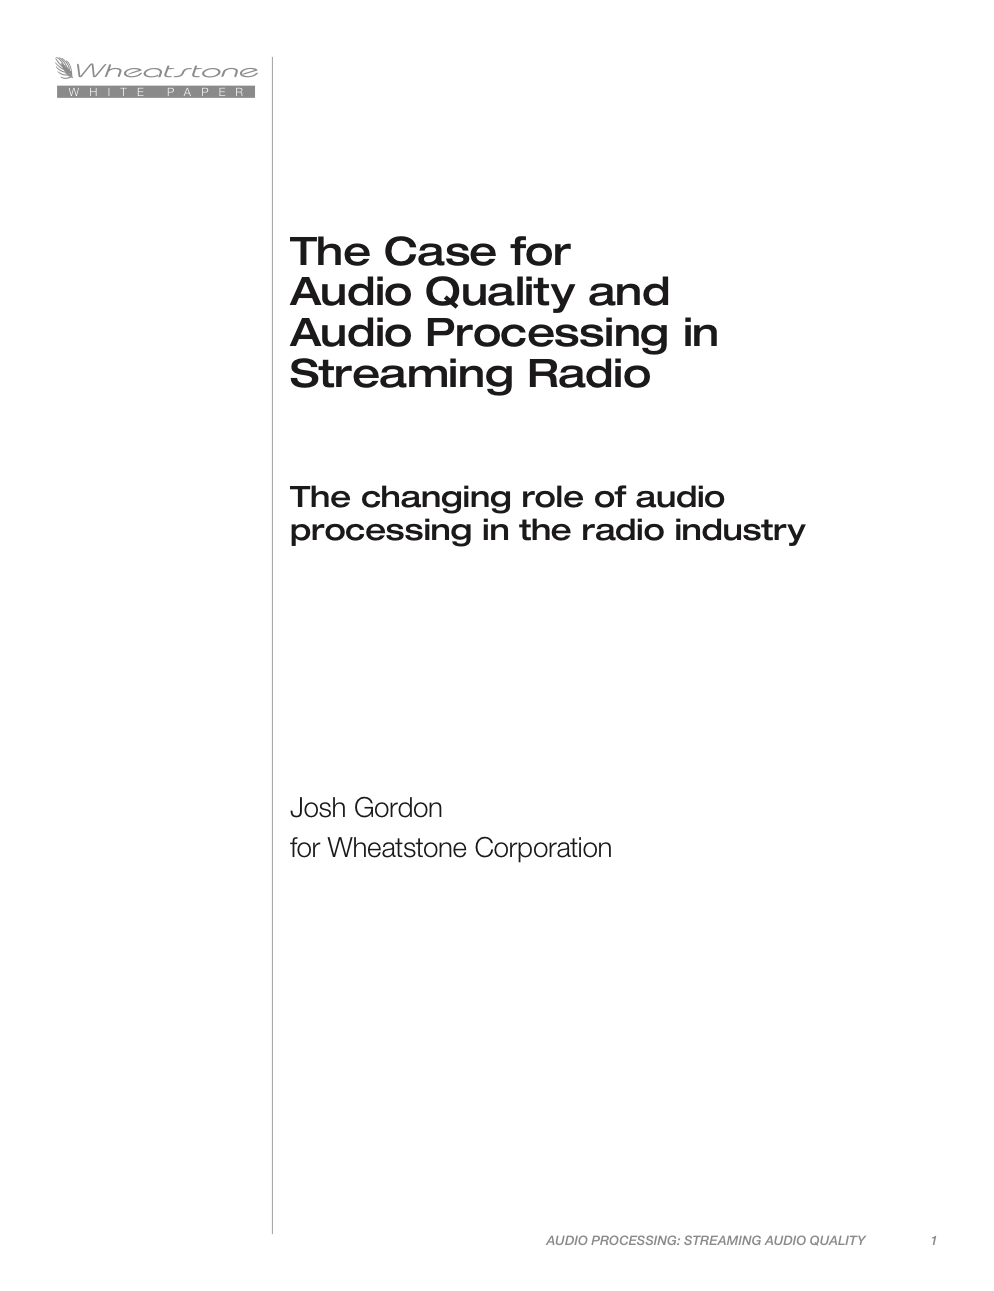 The Case for Audio Quality and Audio Processing in Streaming Radio